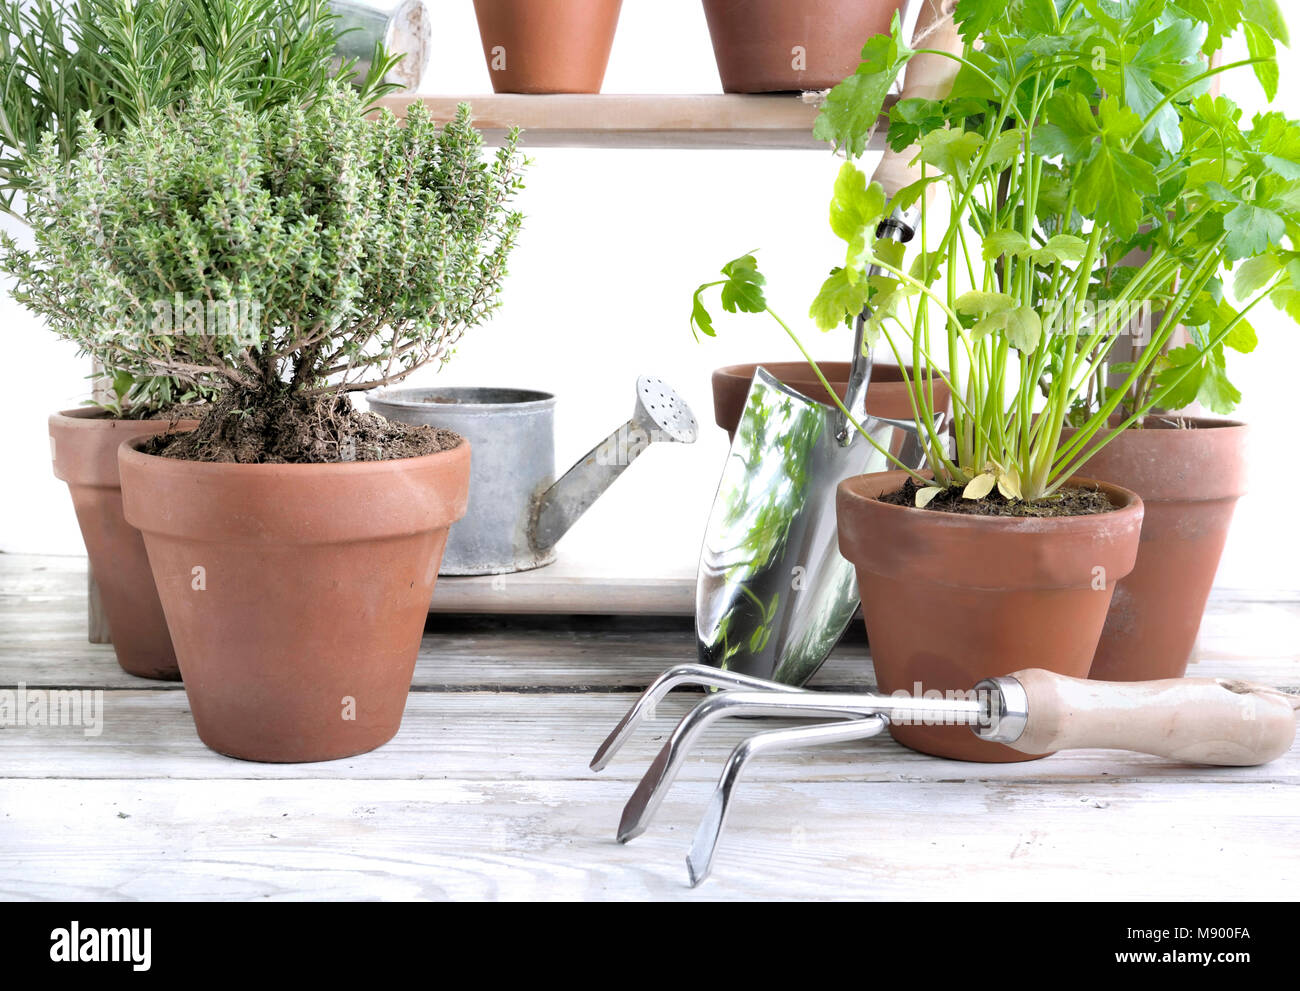 various herbs aromatic in pot on white wooden table with gardening tools Stock Photo